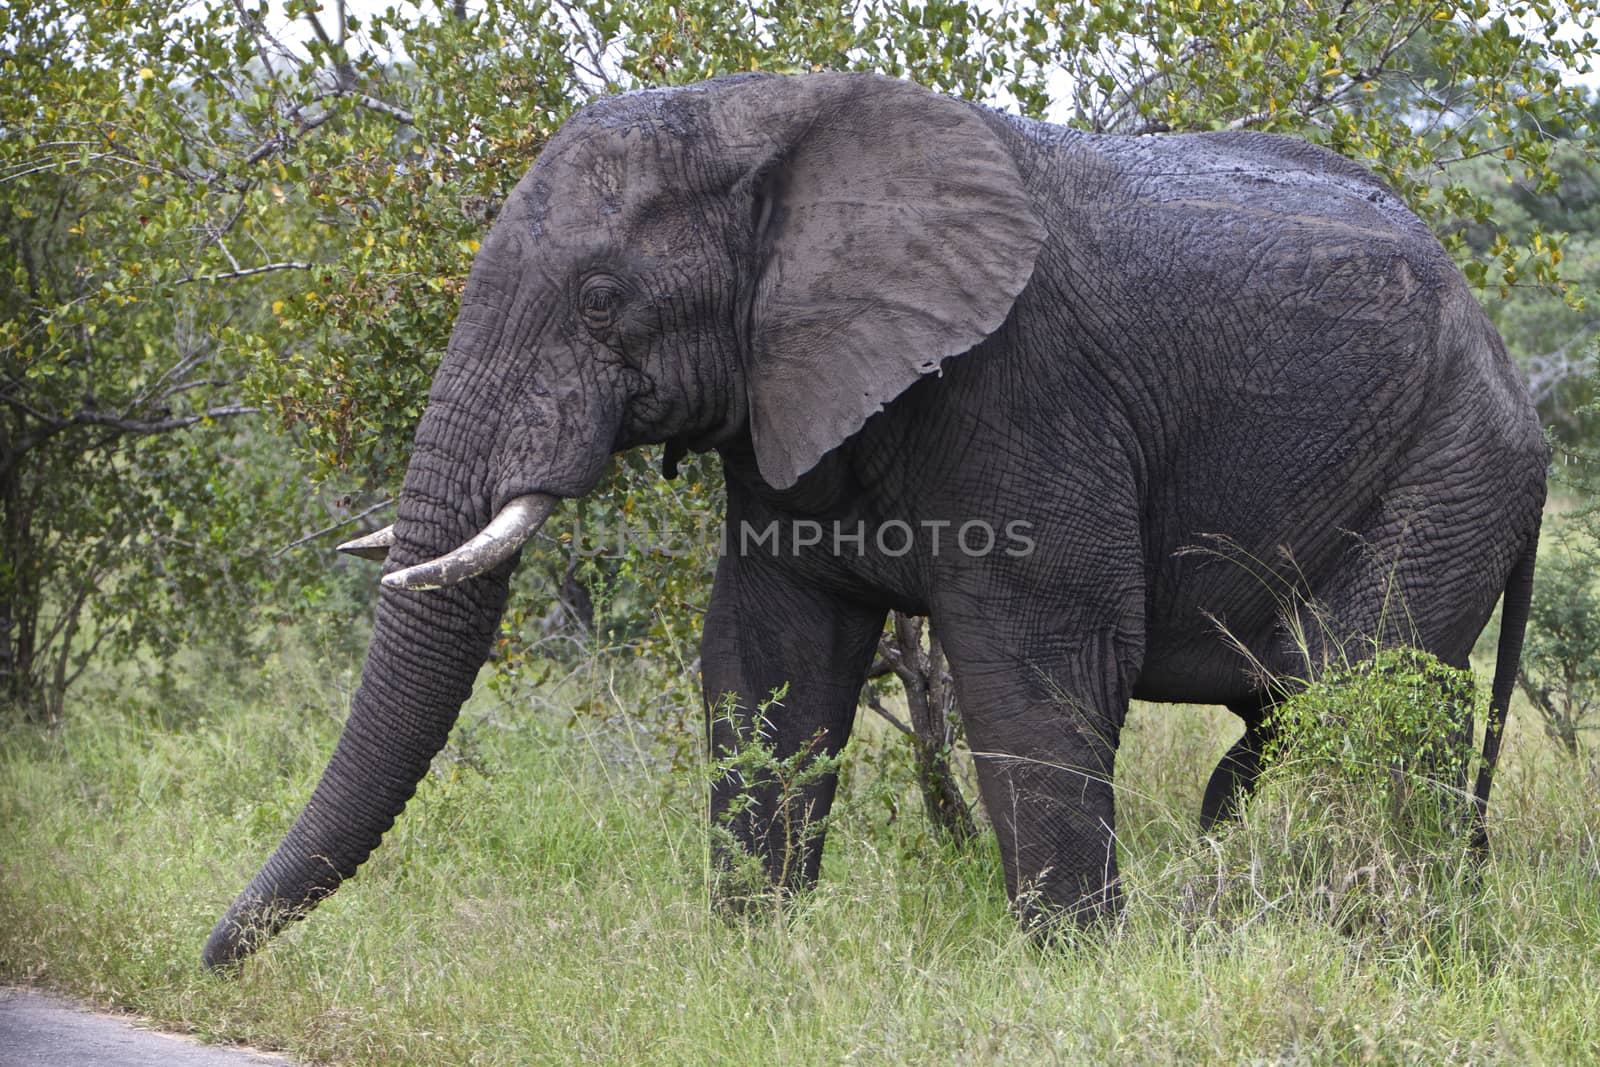 A bull elephant in Kruger National Park, South Africa